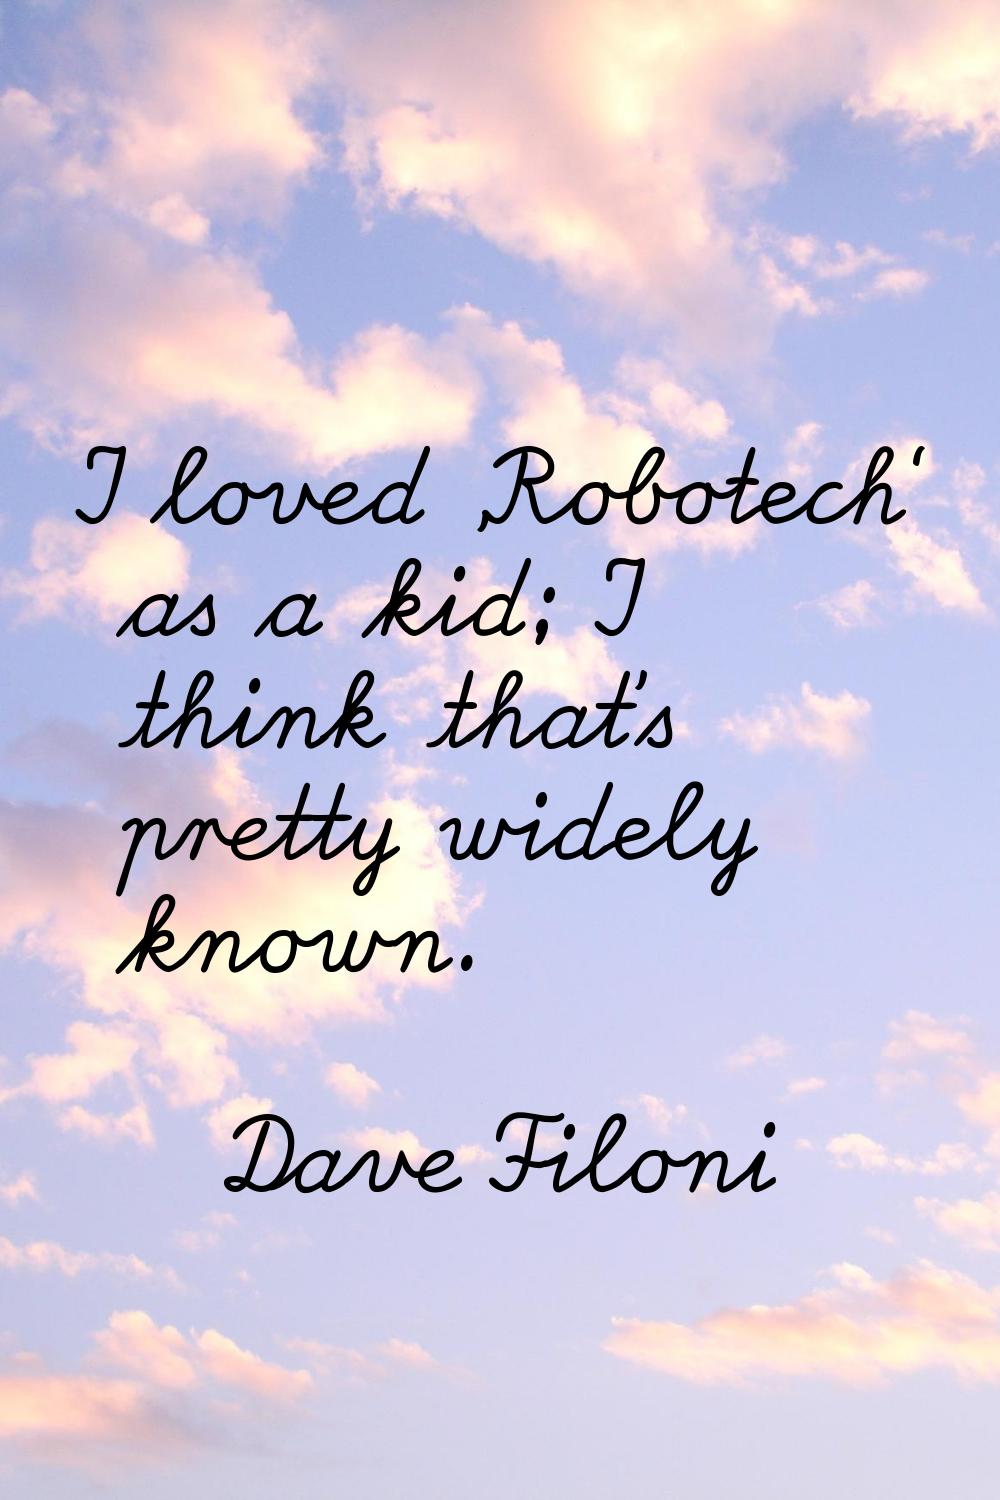 I loved 'Robotech' as a kid; I think that's pretty widely known.